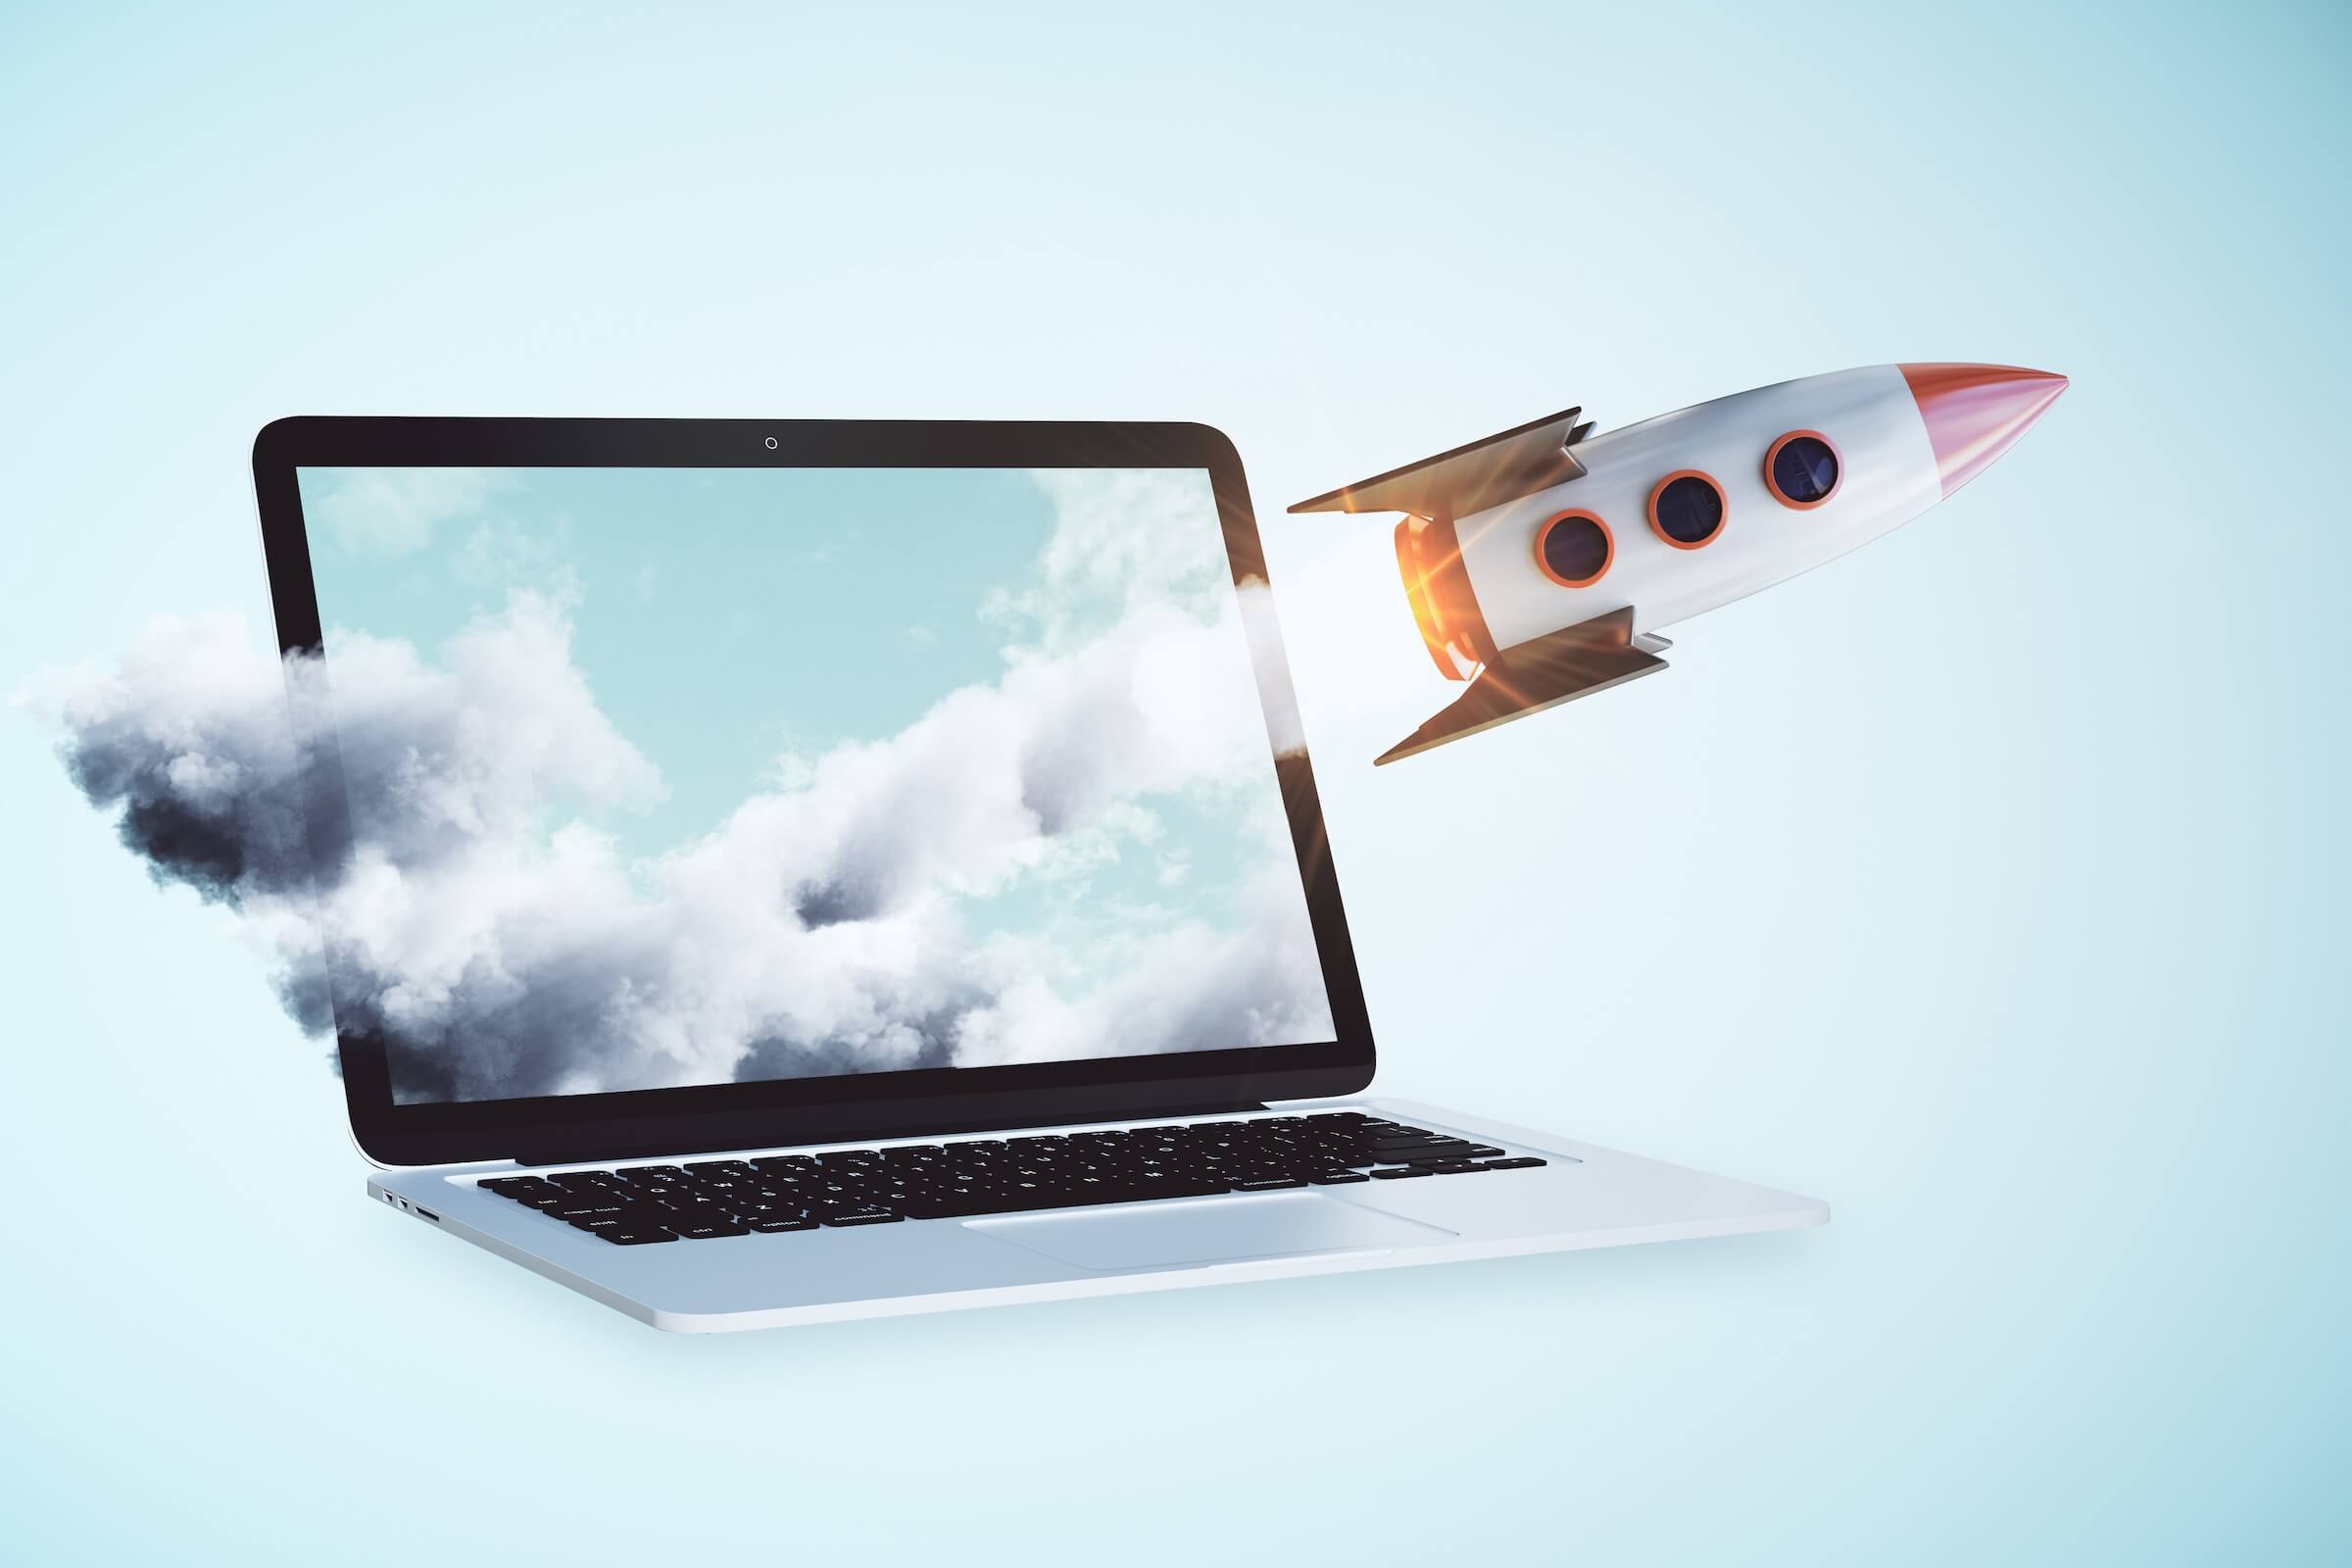 A rocket flying out of a laptop illustration